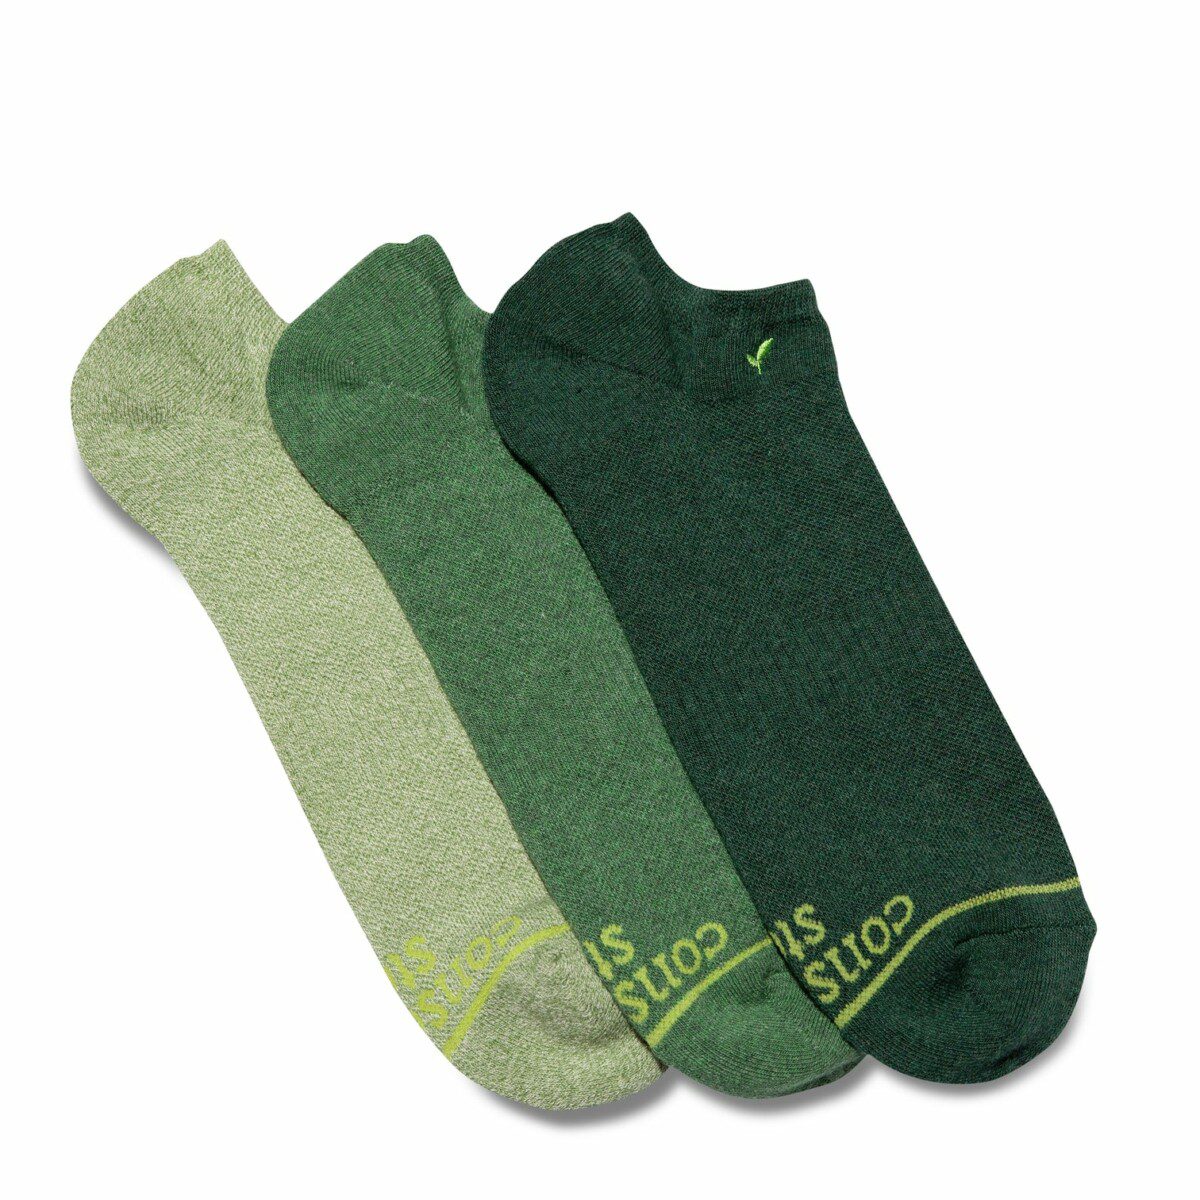 organic cotton socks from conscious step on thefiltery.com